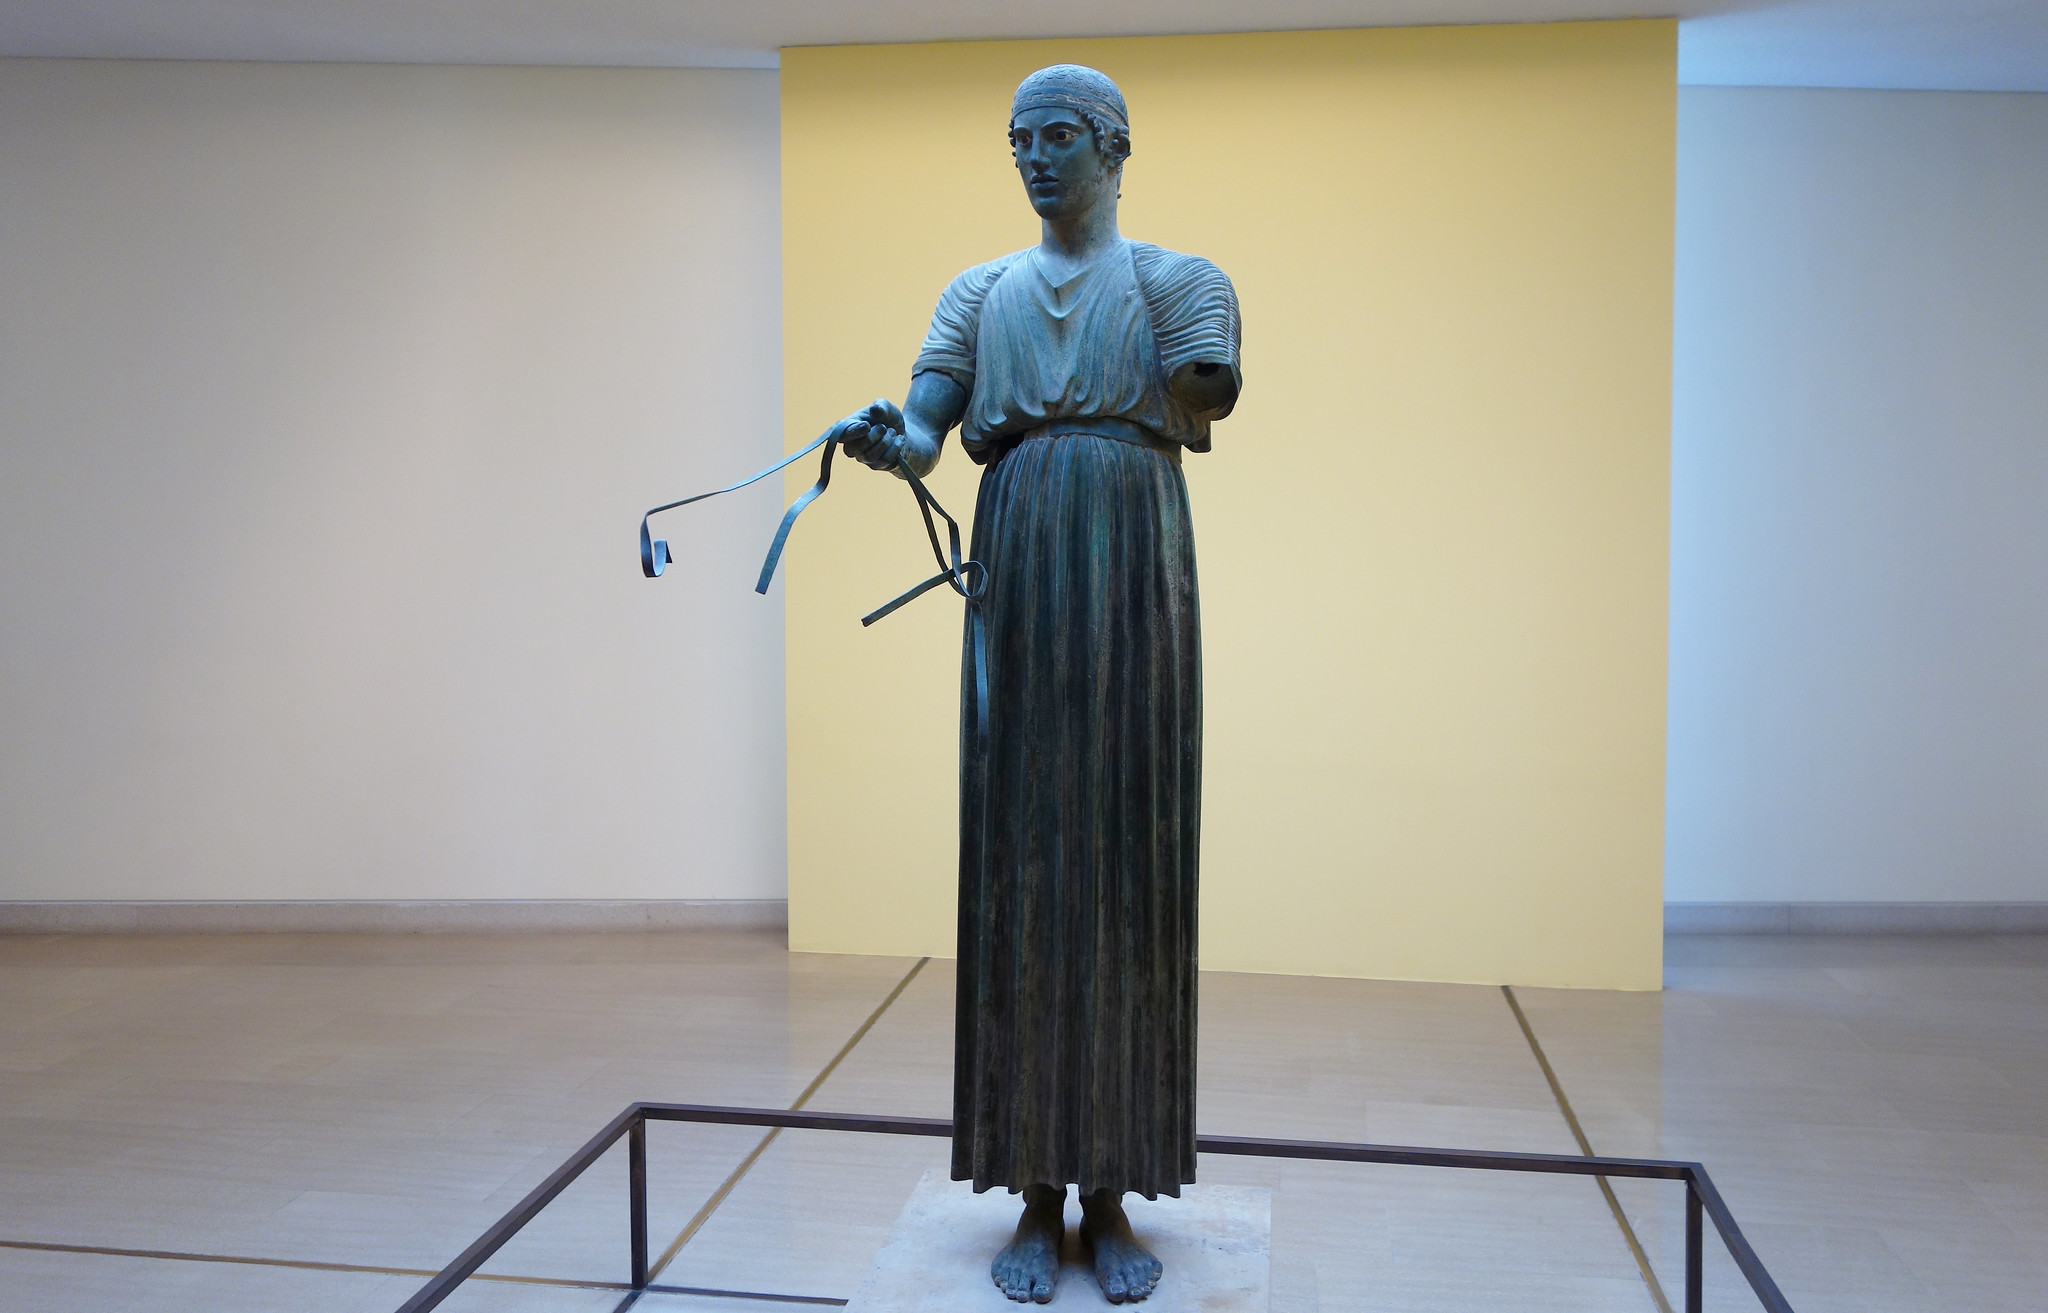 Charioteer of Delphi, c. 478-474 B.C.E., bronze (lost wax cast) with silver, glass and copper inlay, 1.8 m high (Delphi Archaeological Museum)